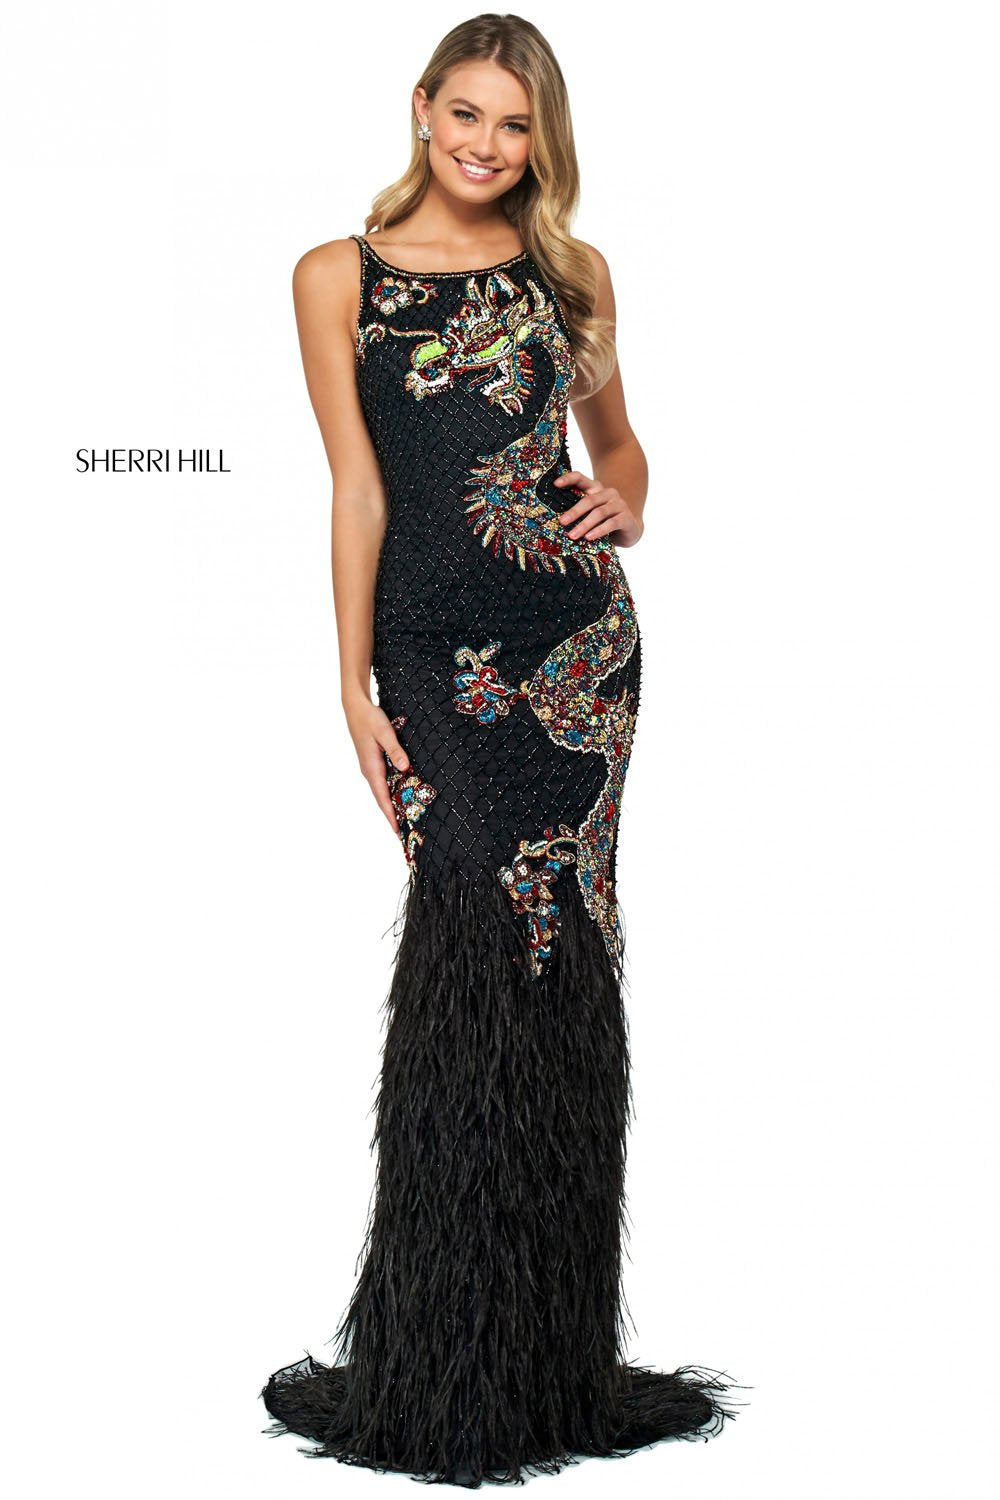 Sherri Hill 53608 dress images in these colors: Nude Silver, Black Multi.